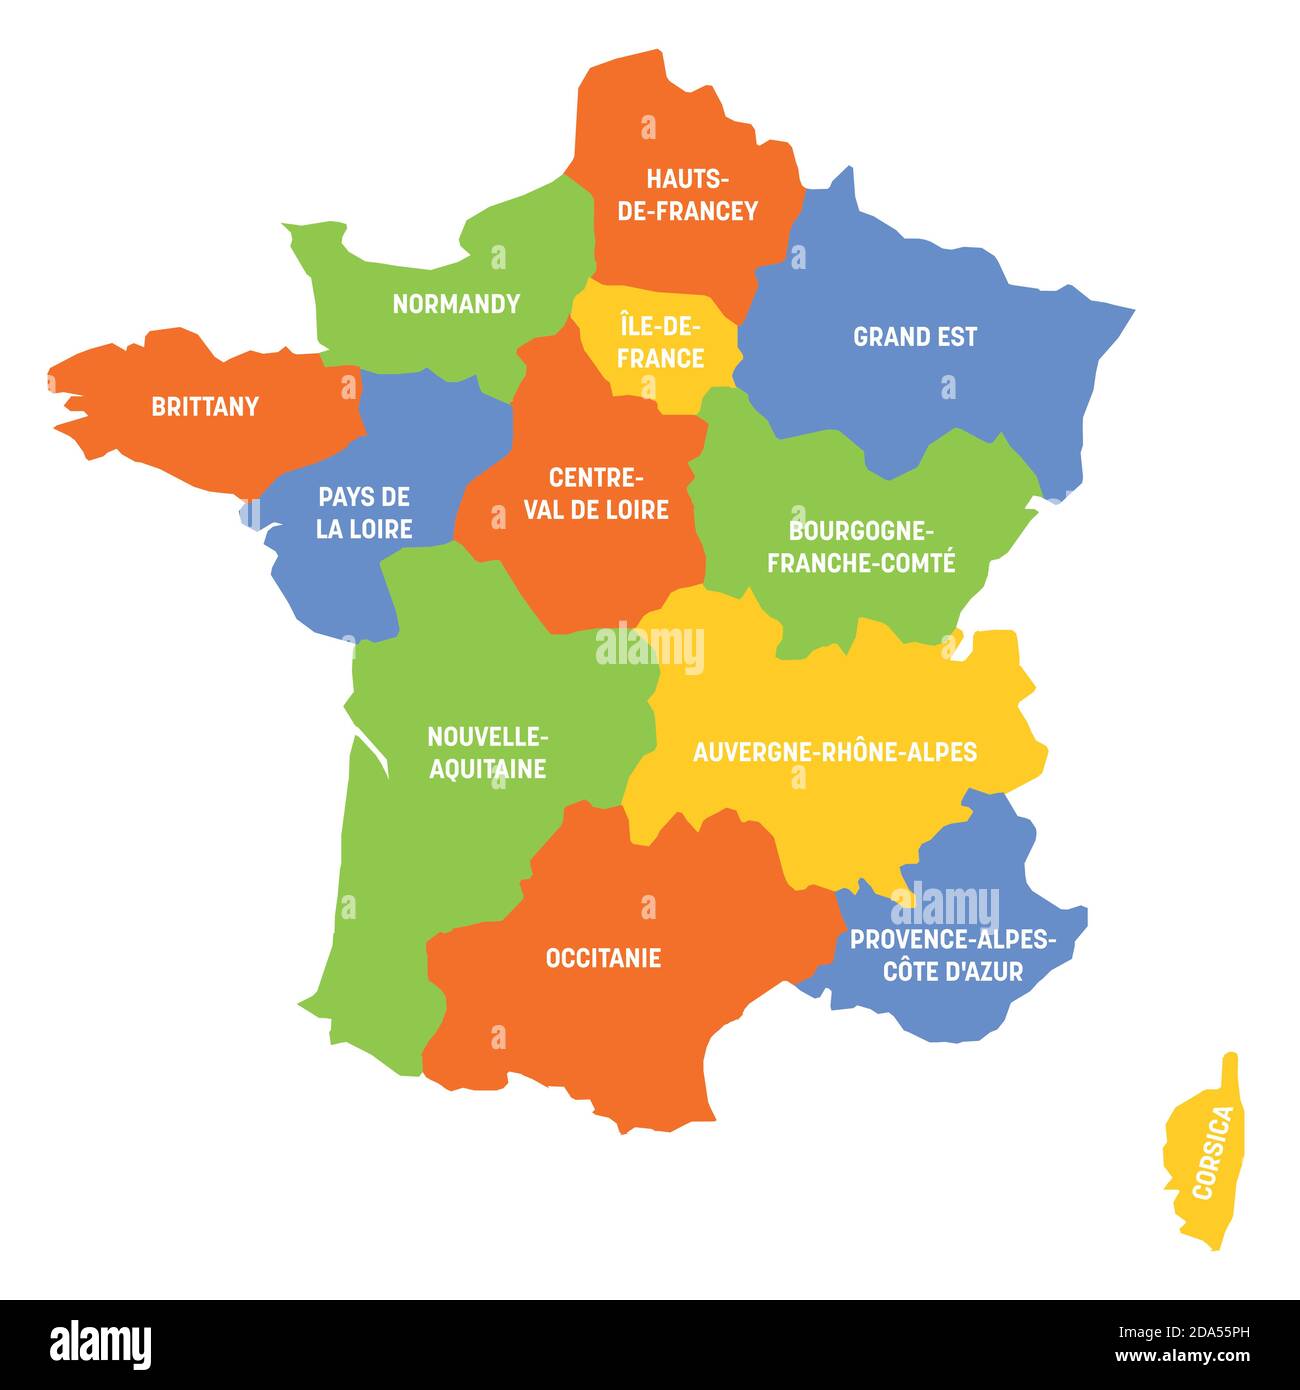 France political map of France. Administrative divisions - metropolitan regions. Simple flat vector map with labels. Stock Vector